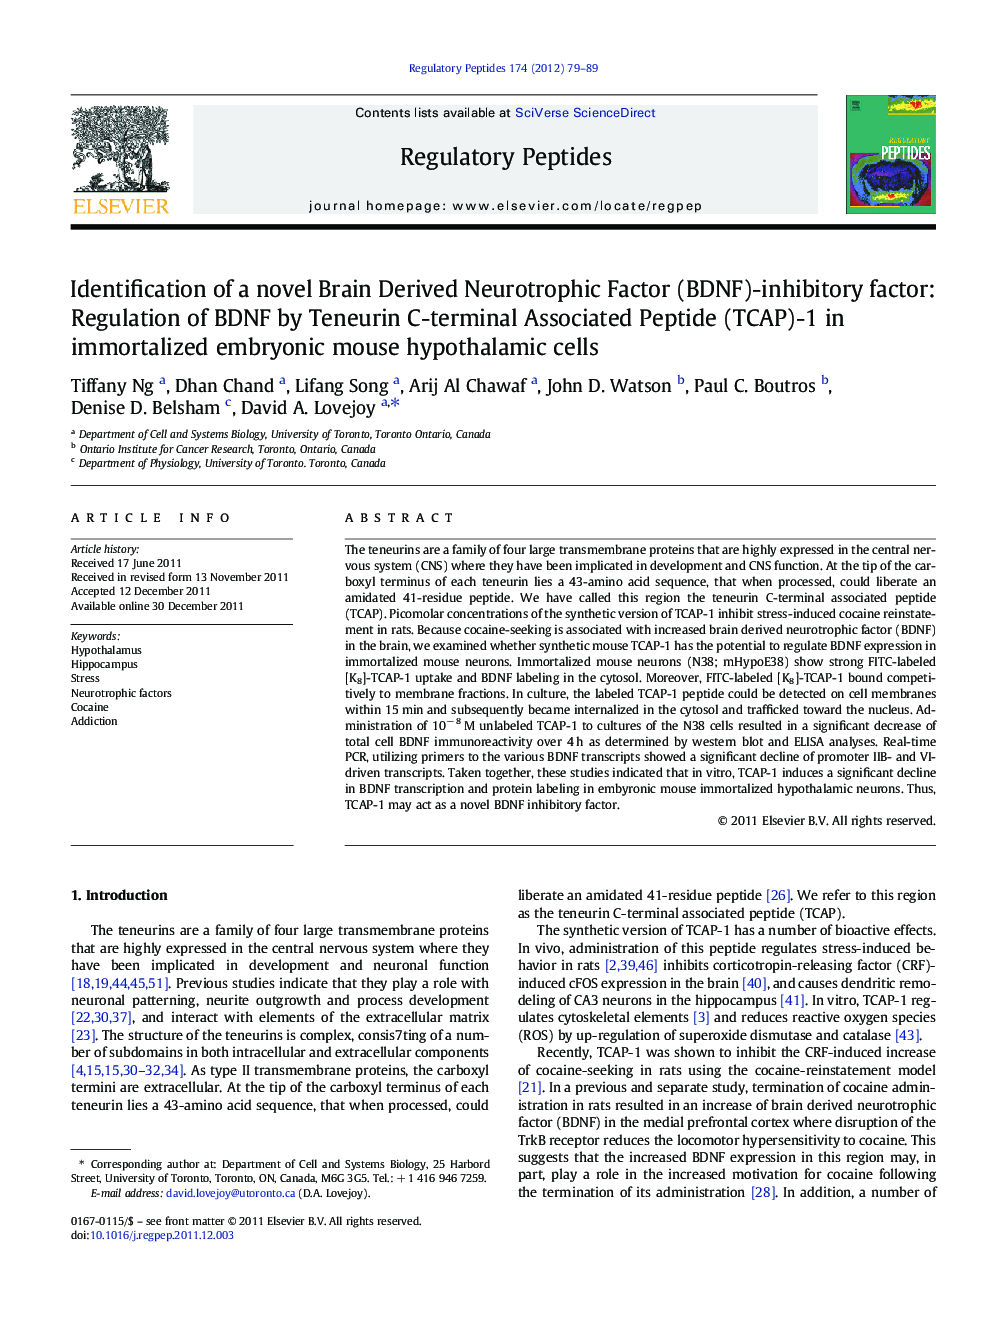 Identification of a novel Brain Derived Neurotrophic Factor (BDNF)-inhibitory factor: Regulation of BDNF by Teneurin C-terminal Associated Peptide (TCAP)-1 in immortalized embryonic mouse hypothalamic cells